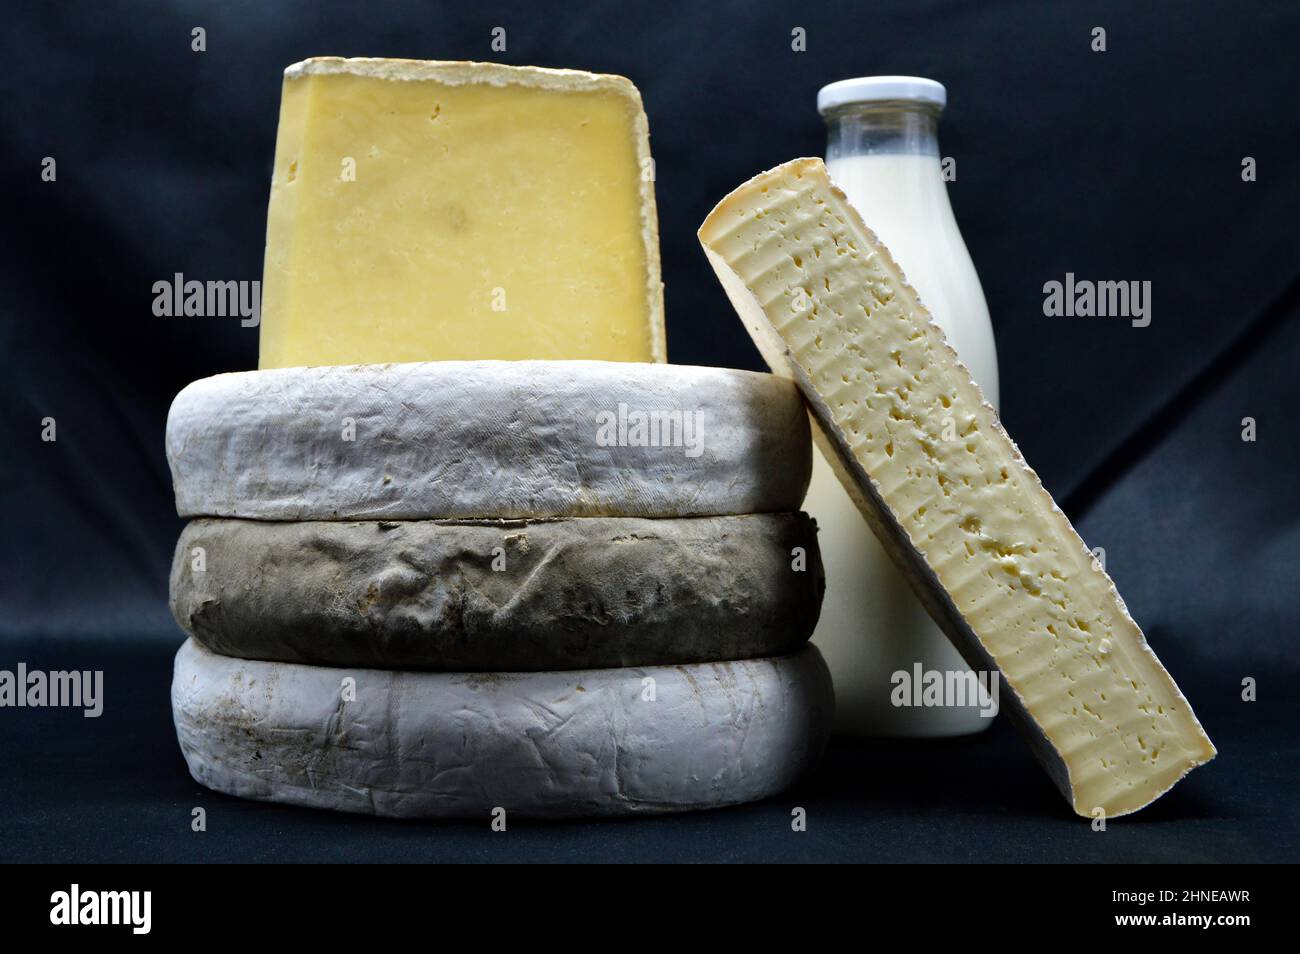 Saint Nectaire cheese and Cantal cheese. It is an Auvergne cheese and a mountain cheese made with cow’s milk. Stock Photo